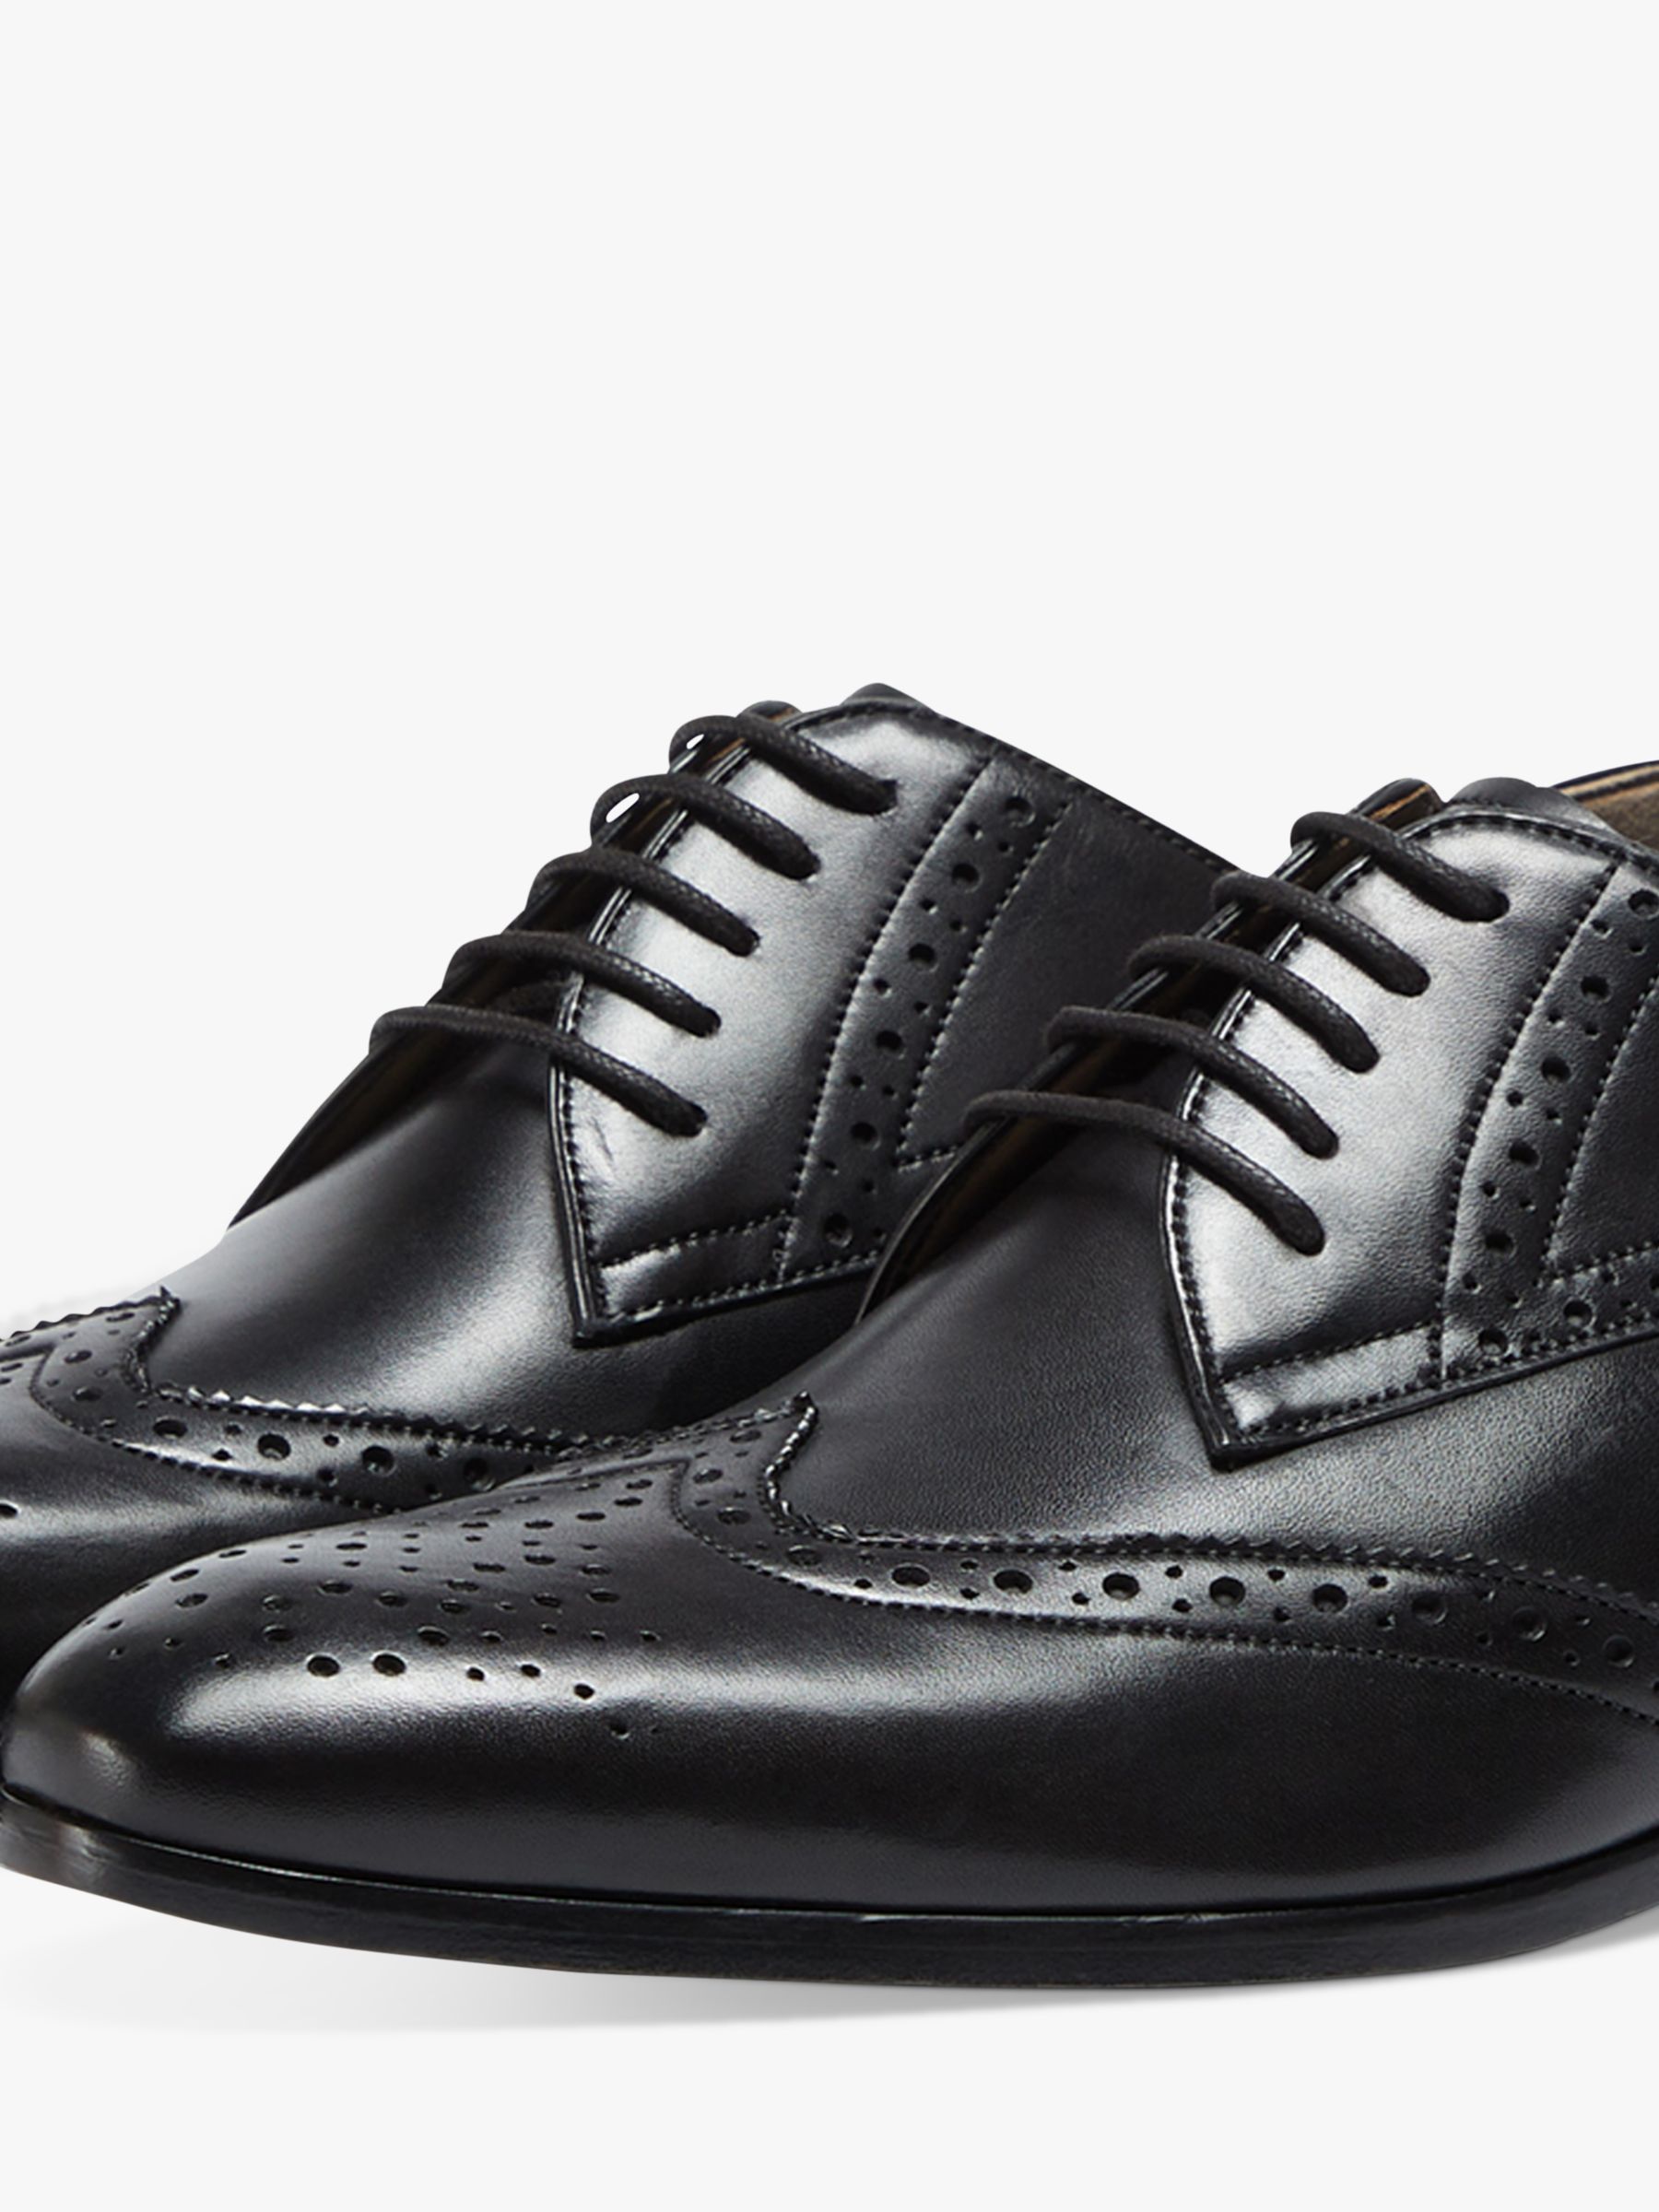 Oliver Sweeney Fressingfield Derby Brogue Shoes, Black, 7